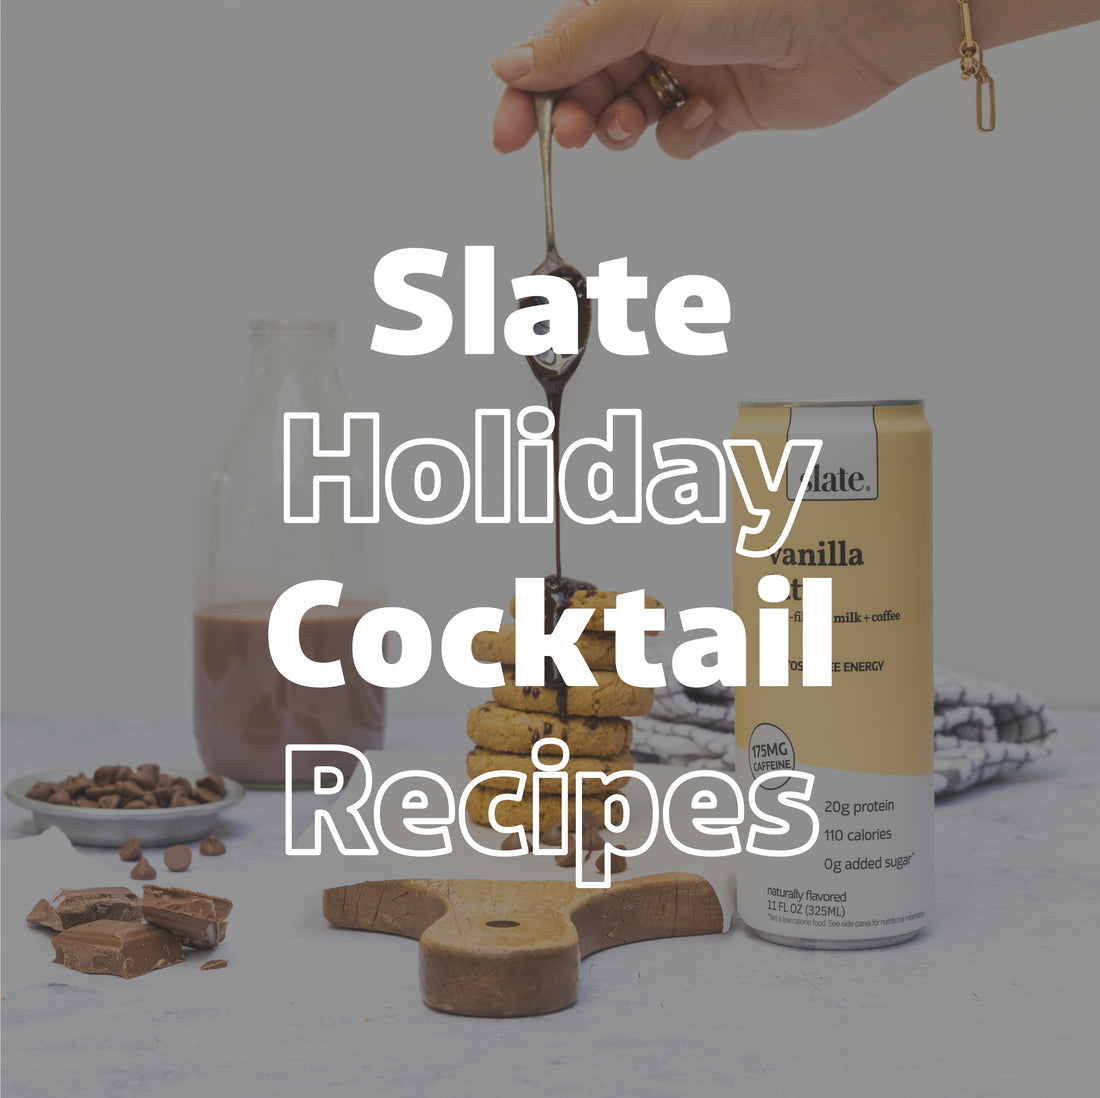 Holiday Cocktail Recipes: Slate Edition